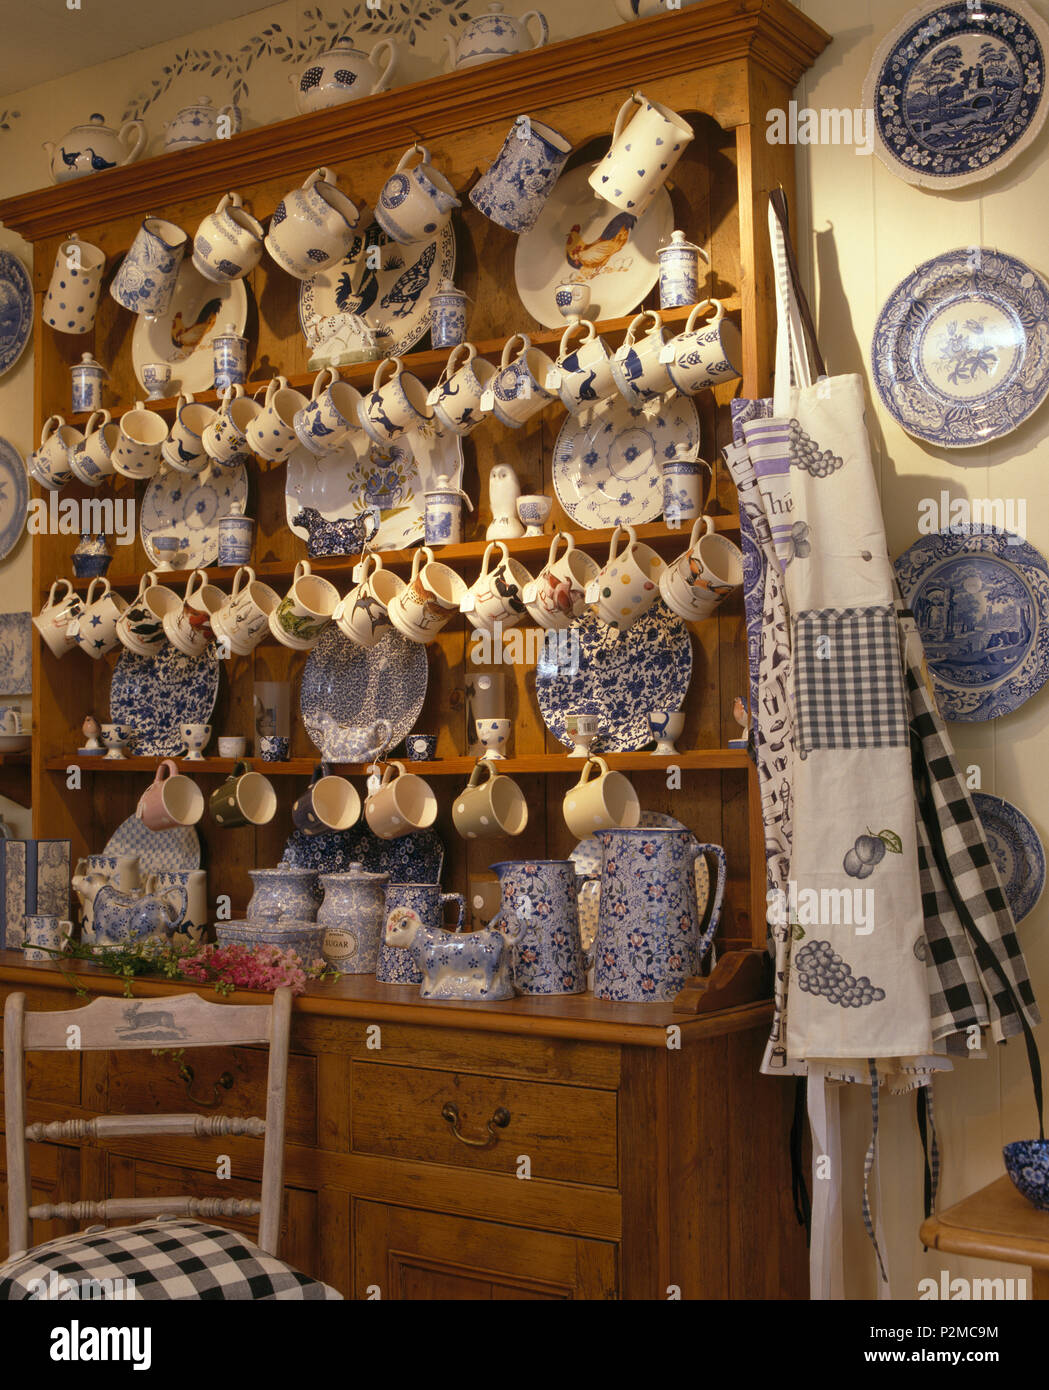 https://c8.alamy.com/comp/P2MC9M/large-pine-dresser-with-collection-of-bluewhite-china-and-pottery-mugs-P2MC9M.jpg